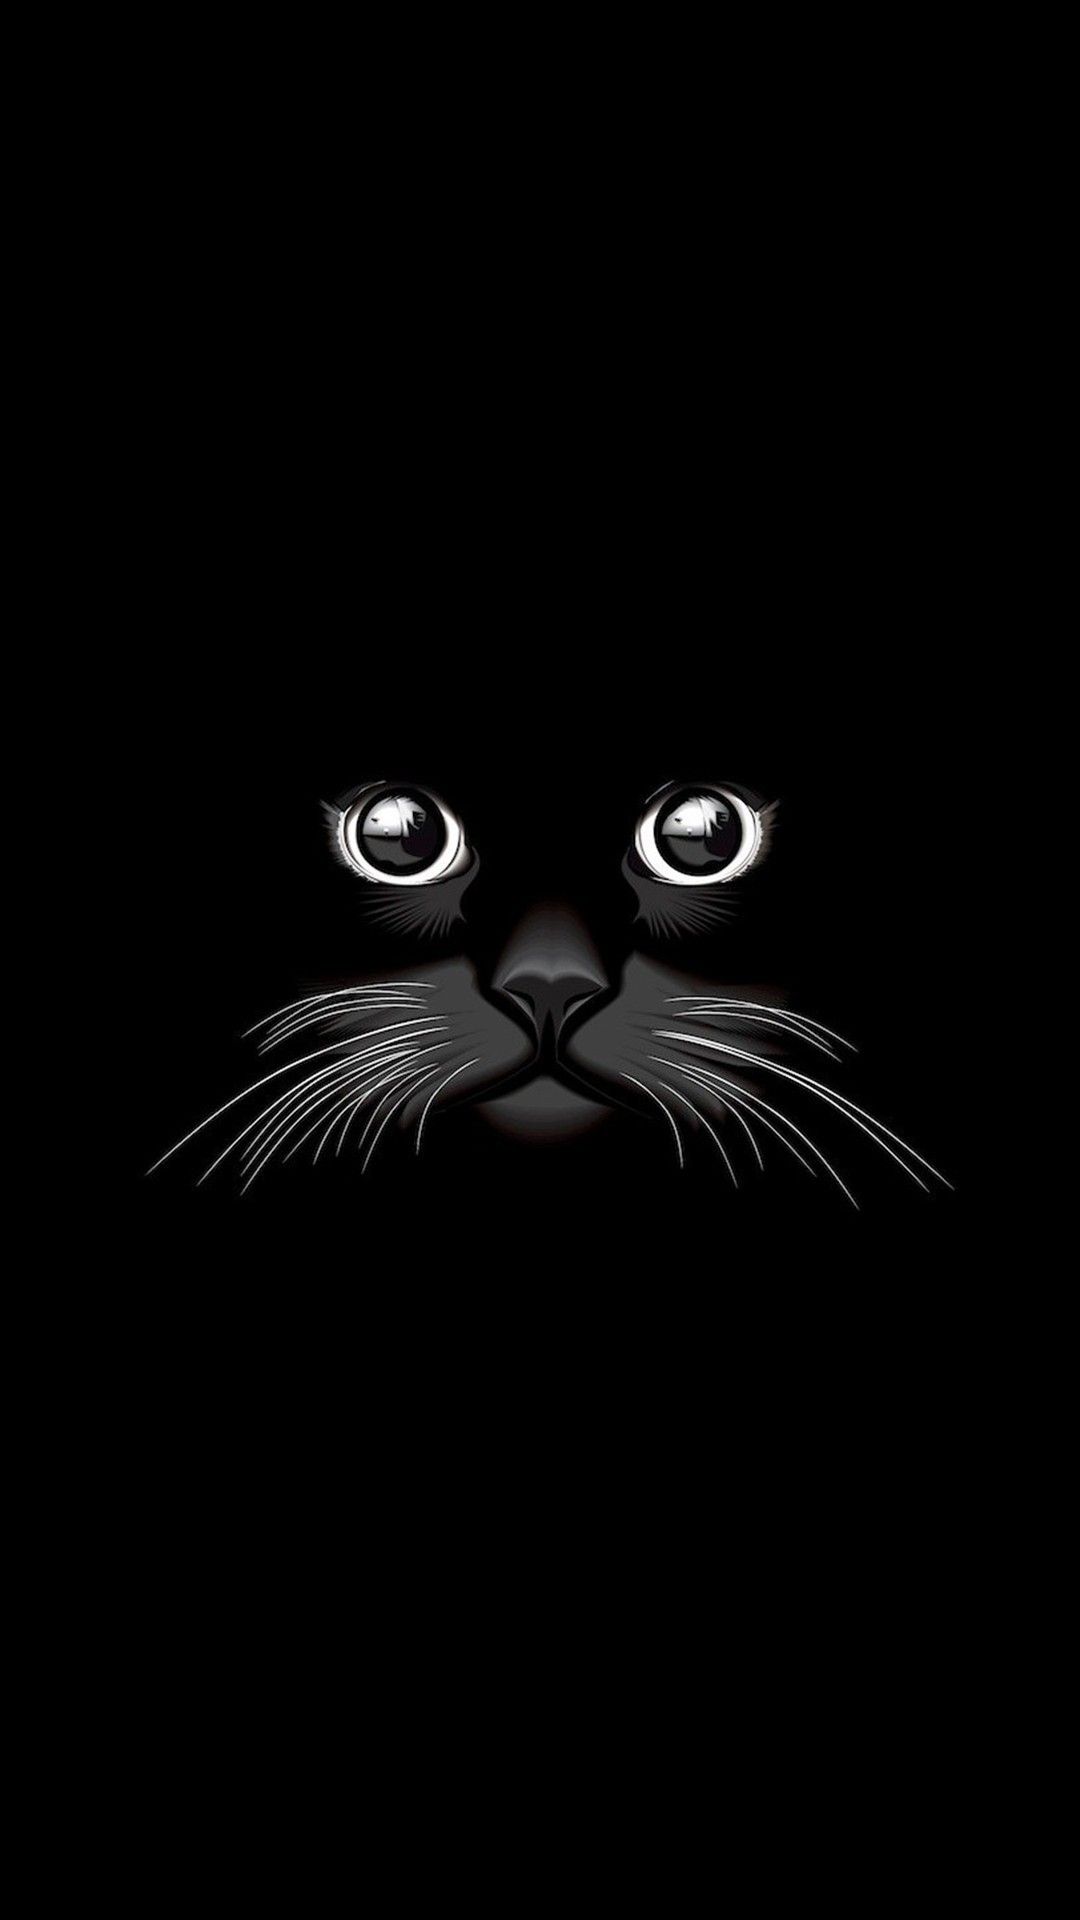 Black Cat For Mobile Wallpapers - Wallpaper Cave